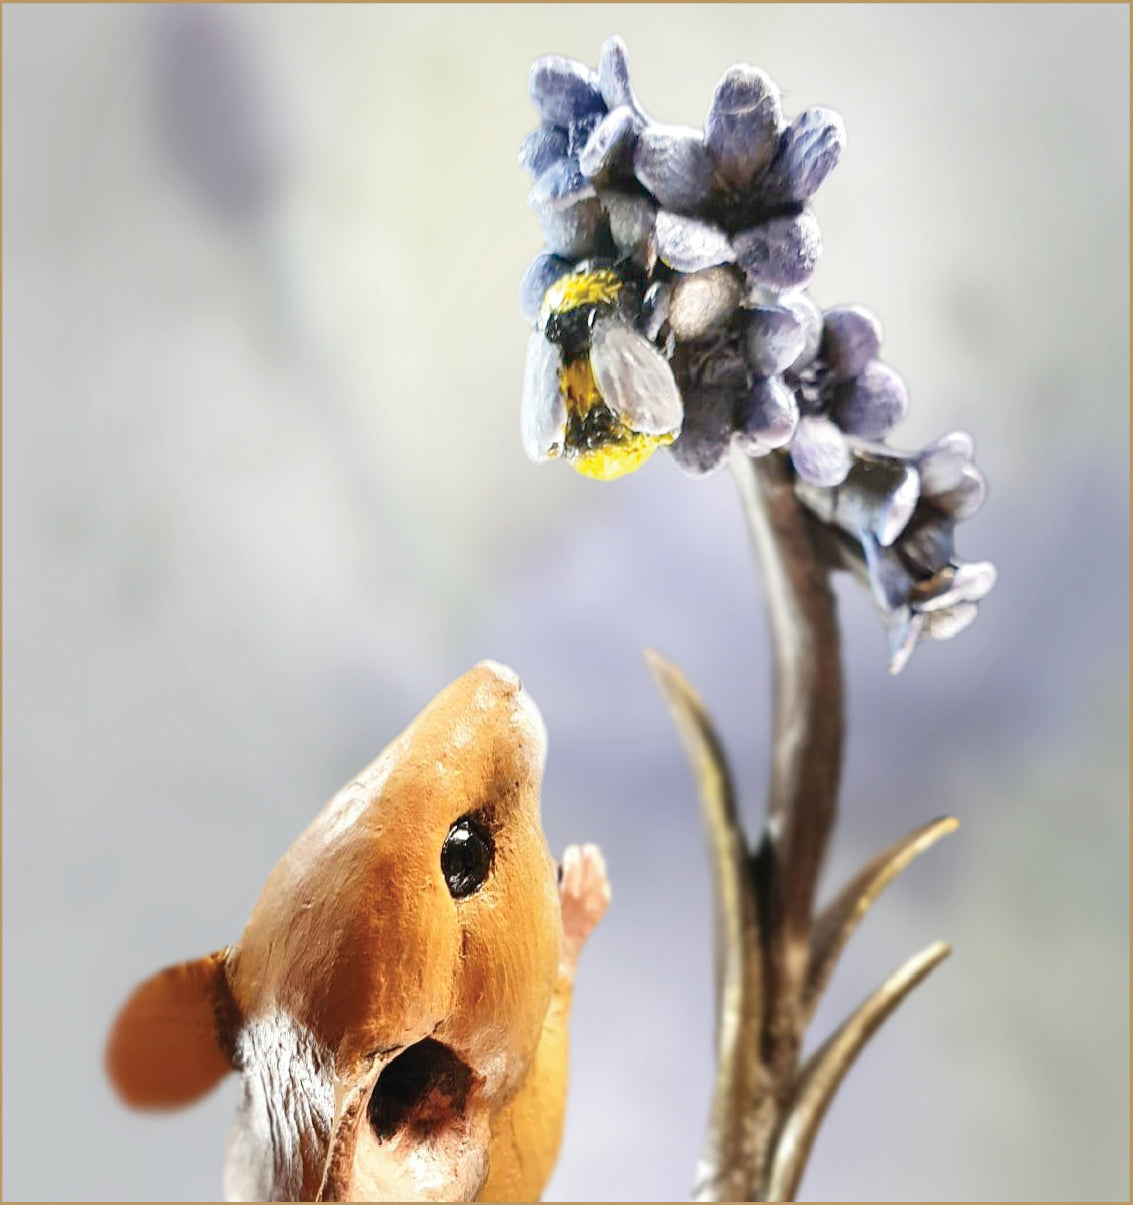 hand painted bronze mouse bluebells bee sculpture